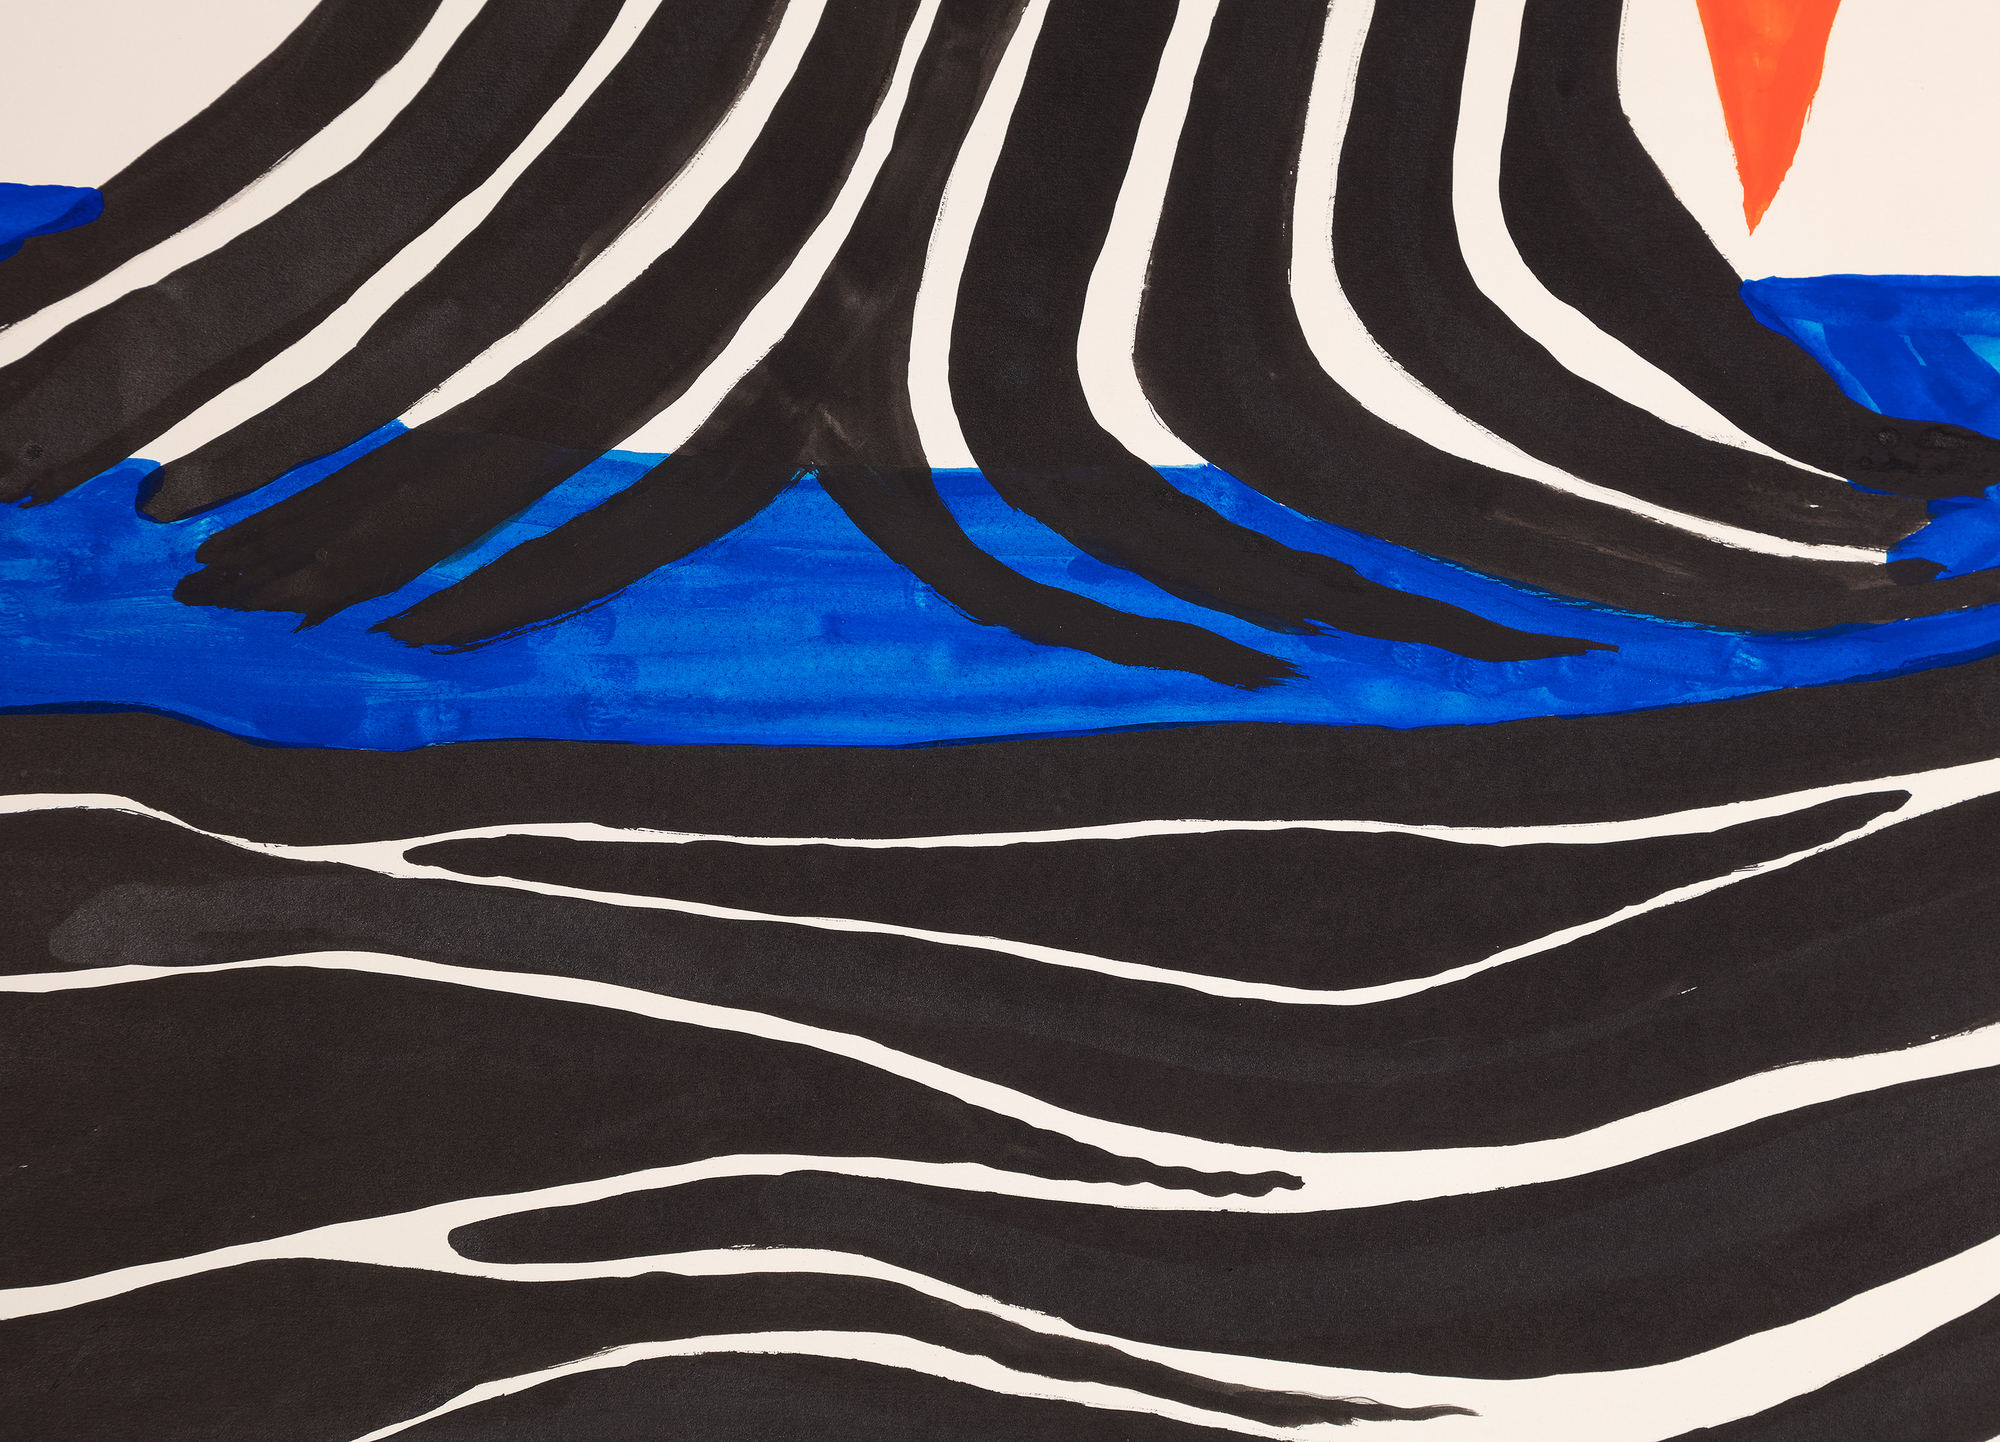 Zigzag, Sun, and Crags, painted in 1972, recalls the early morning hour of June 9, 1922 when the young seafaring adventurer Sandy (Alexander) Calder was awakened on the deck of the H. F. Alexander by the intense beams of tropical sunlight that burst across the bow. He stood, squinting against the glare, then turned his head to the west and felt a sudden rush of sensations that brought to him a cosmic resonance he had never felt before. &lt;br&gt;&lt;br&gt;“It was early one morning on a calm sea, off Guatemala, when over my couch — a coil of rope — I saw the beginning of a fiery red sunrise on one side and the moon looking like a silver coin on the other. Of the whole trip this impressed me most of all; it left me with a lasting sensation of the solar system.” &lt;br&gt;&lt;br&gt;Zignag, Sun, and Crags is not a simple memento of that experience. It is an exhilarating work that celebrates Calder’s inimitable way of imparting the wonder of the natural world by amplifying our experience of it. If, as he might wish, it brings a sense of interconnectedness and belonging as it did to him along the coast of Guatemala as a young Merchant Marine, so much the better.